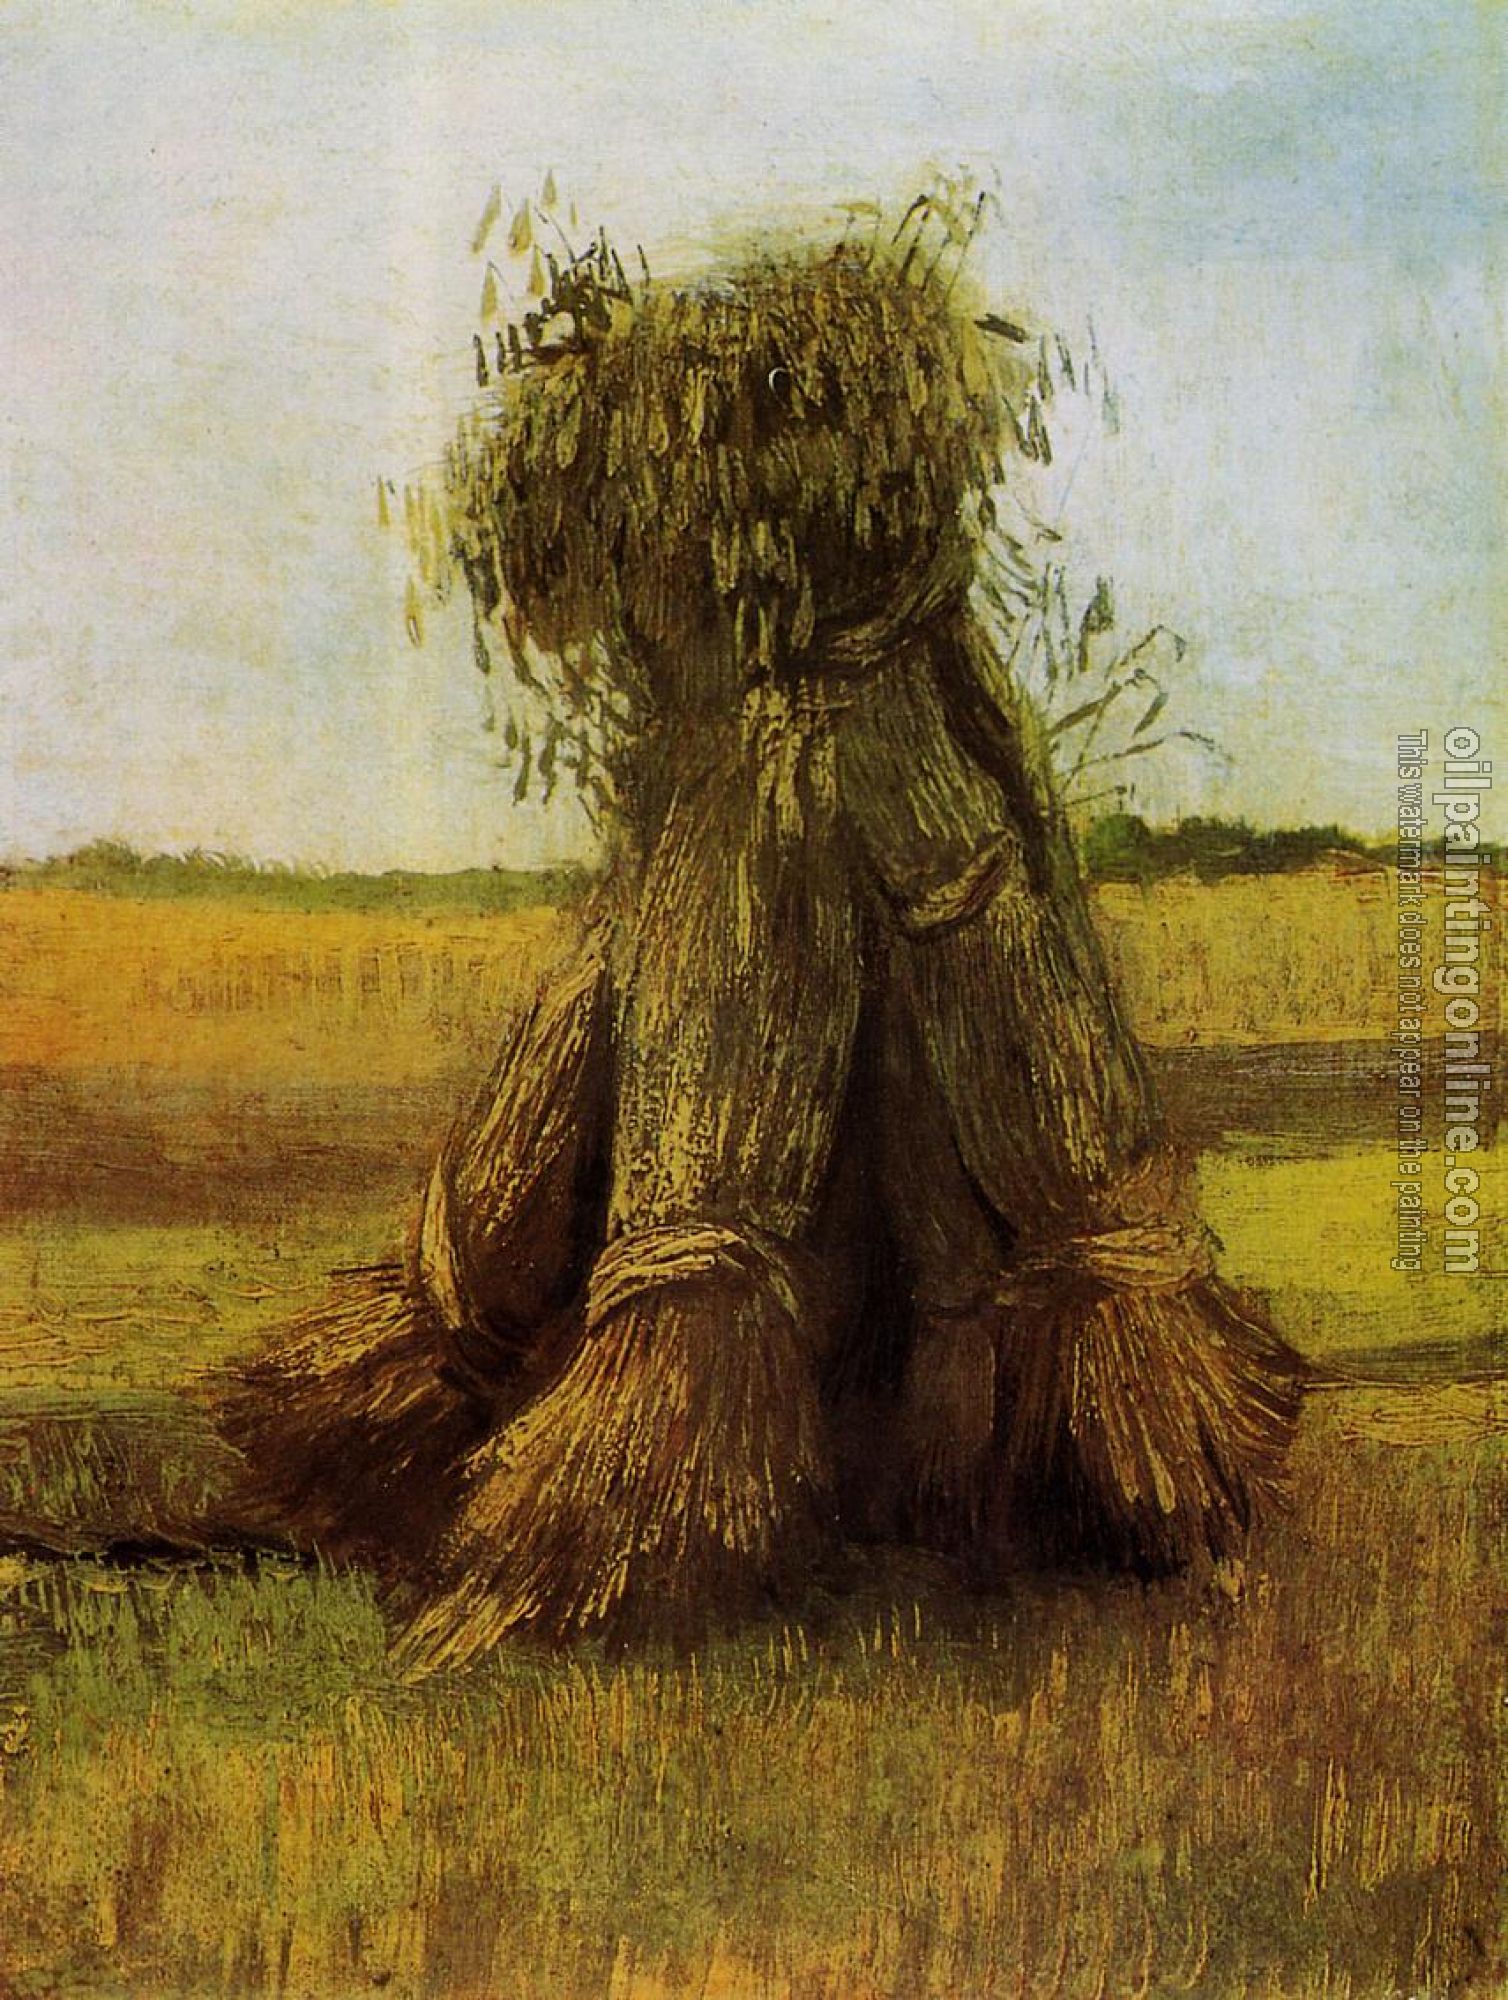 Gogh, Vincent van - Sheaves of Wheat in a Field